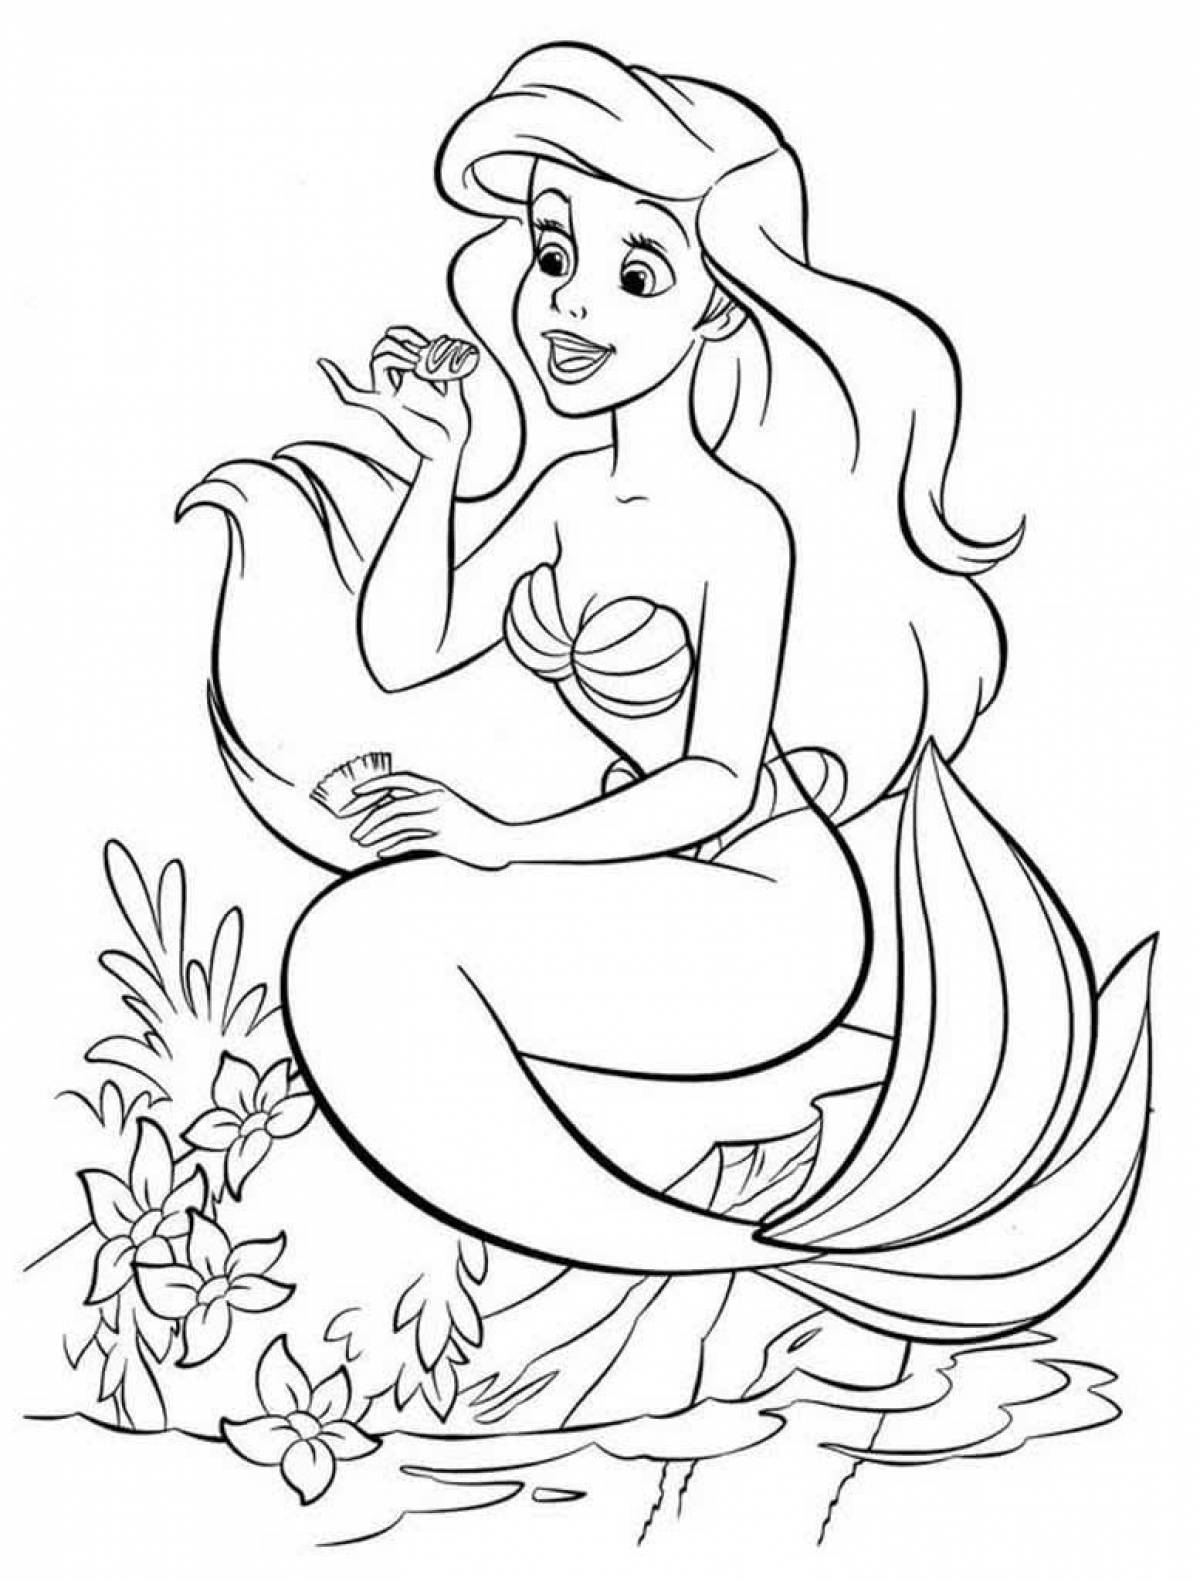 Funny little mermaid coloring book for kids